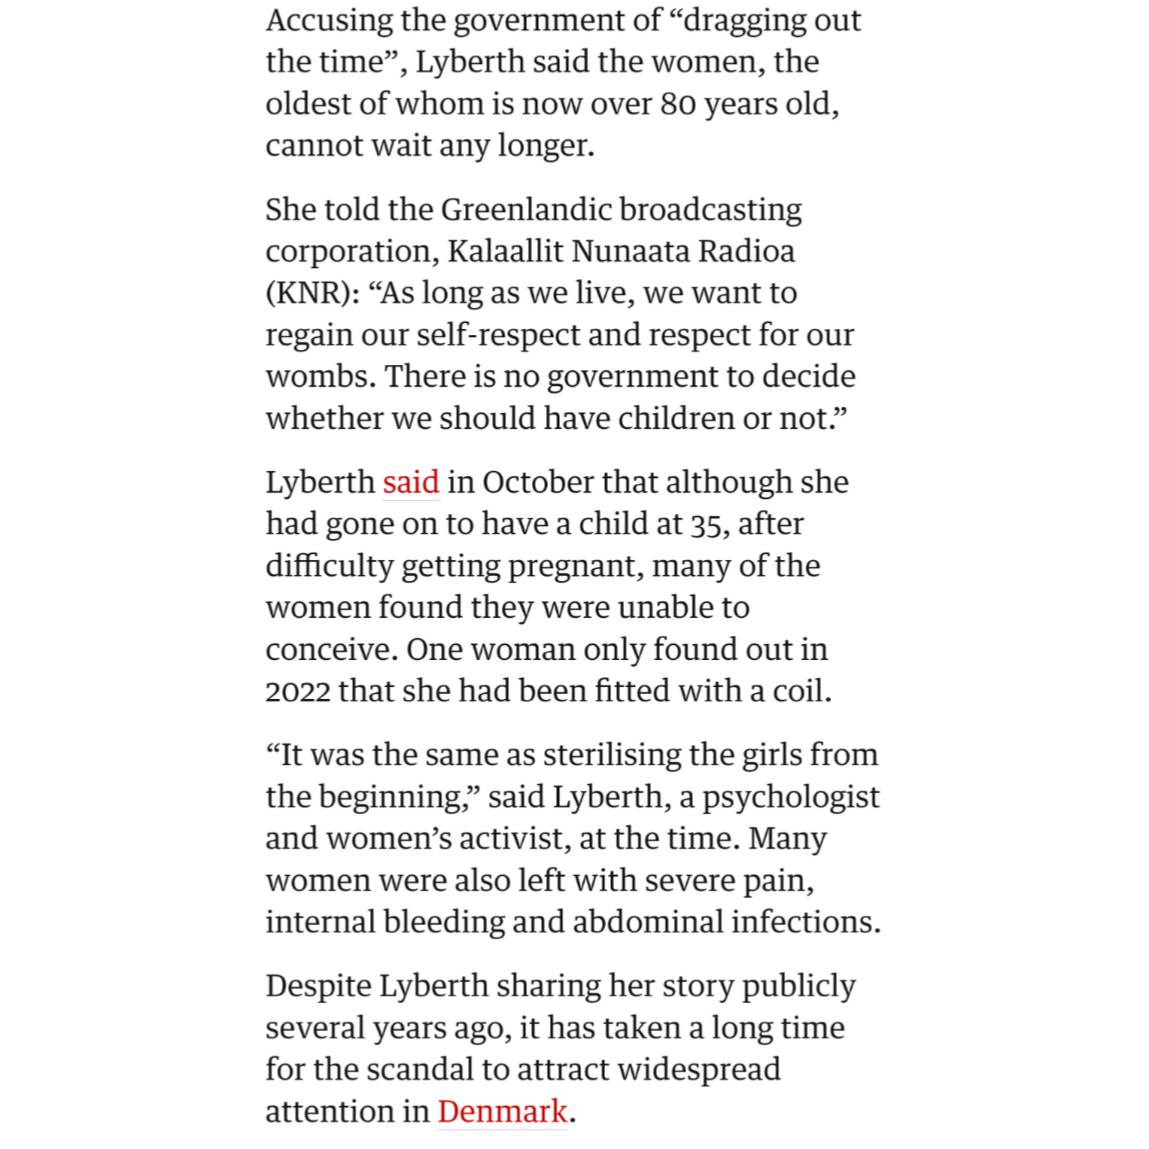 Denmark controlled the population of Greenland by implanting IUDs without consent in women and children. Now they are slow rolling their acknowledgement and not taking accountability for the cruelty they inflicted on these women.